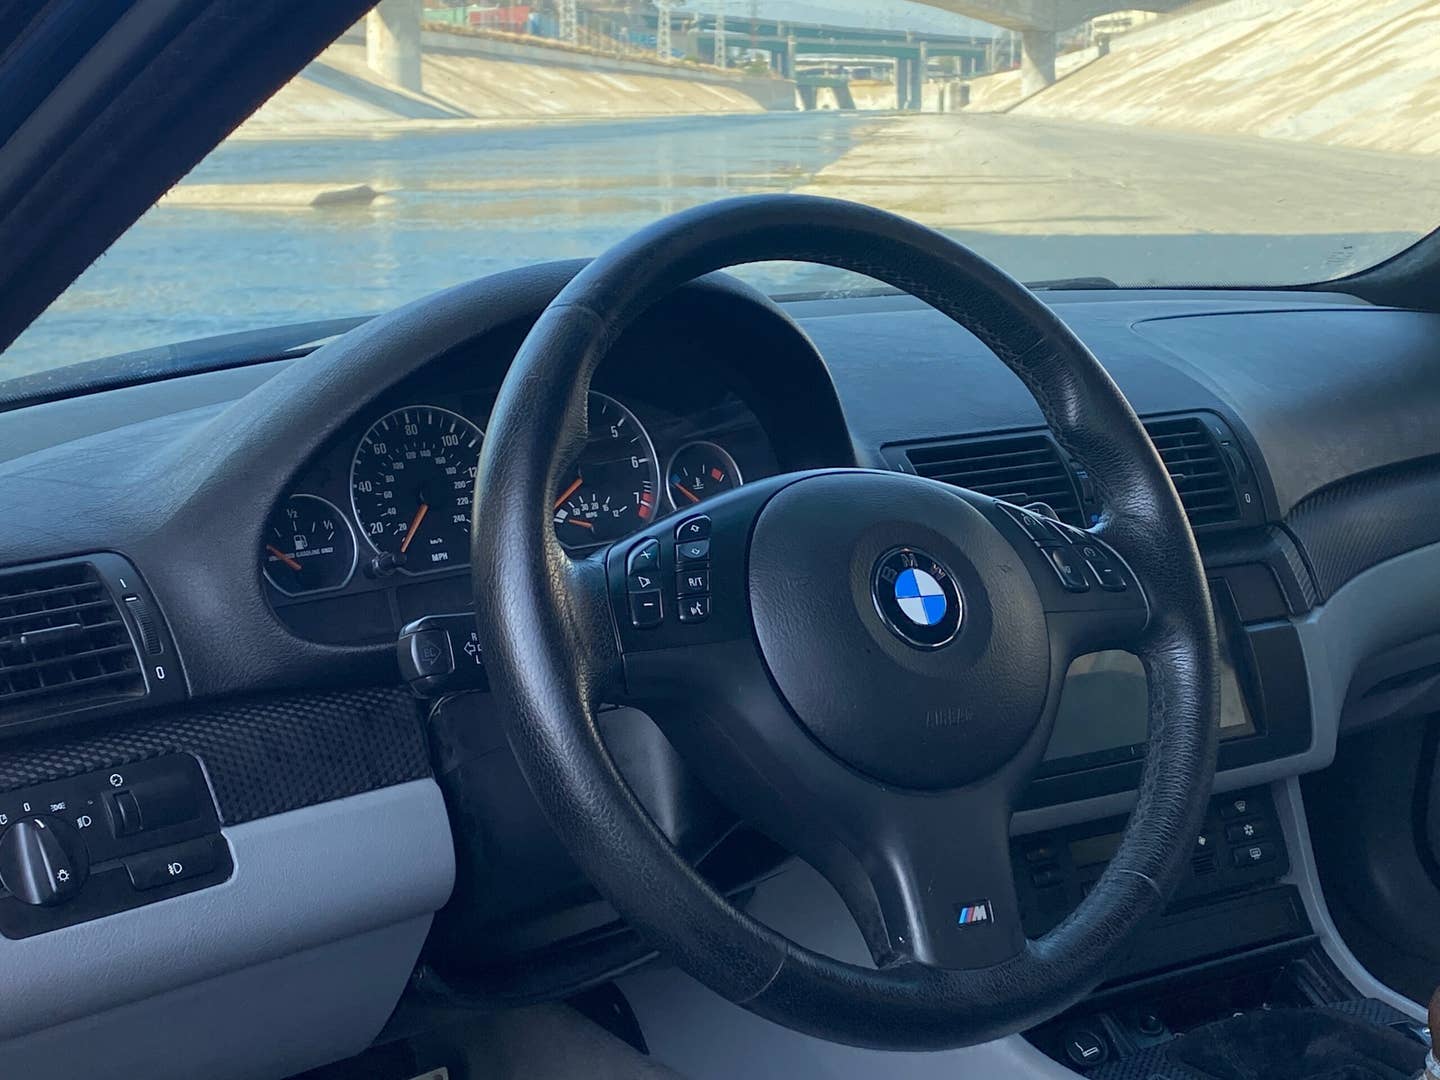 The interior of a BMW 330i ZHP from the open driver's door. The vast concrete expanse of the Los Angeles river stretches beyond the windshield. The lower part of the dashboard is gray.